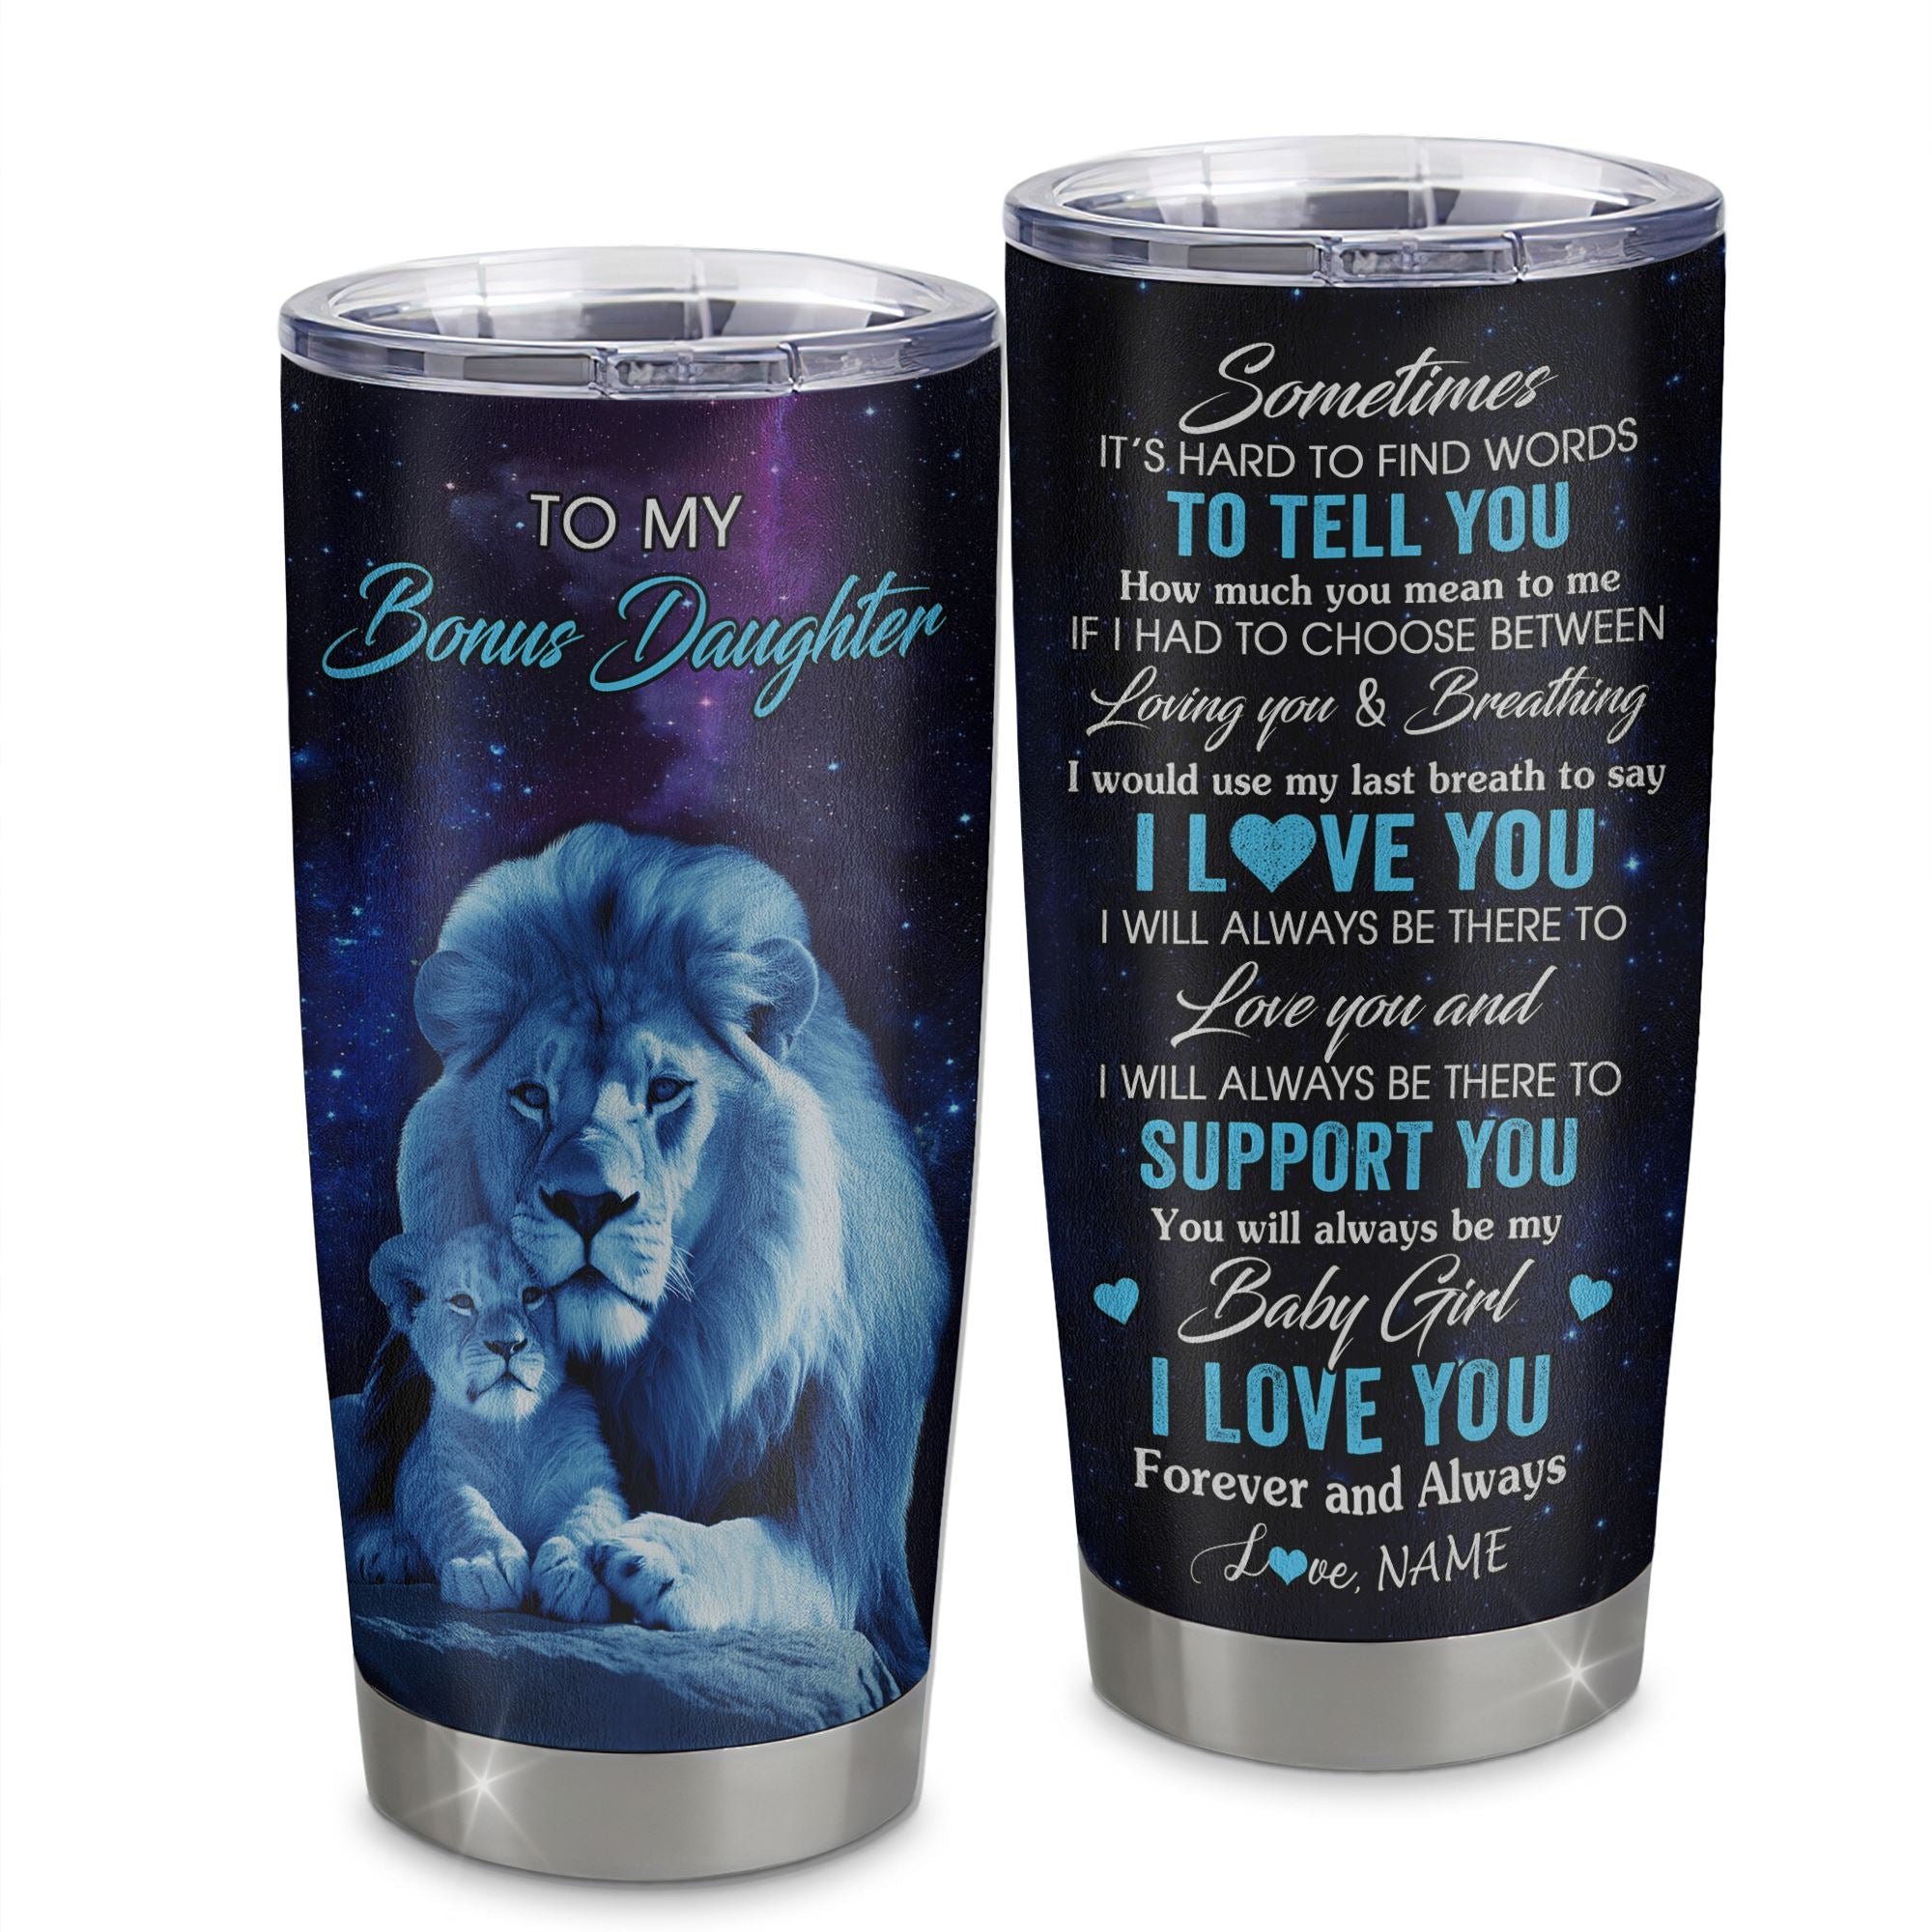 Personalized_To_My_Bonus_Daughter_Tumbler_From_Stepfather_Stainless_Steel_Cup_Sometimes_It_s_Hard_Lion_Stepdaughter_Gift_Birthday_Graduation_Christmas_Custom_Travel_Mug_Tumbler_mockup-1.jpg